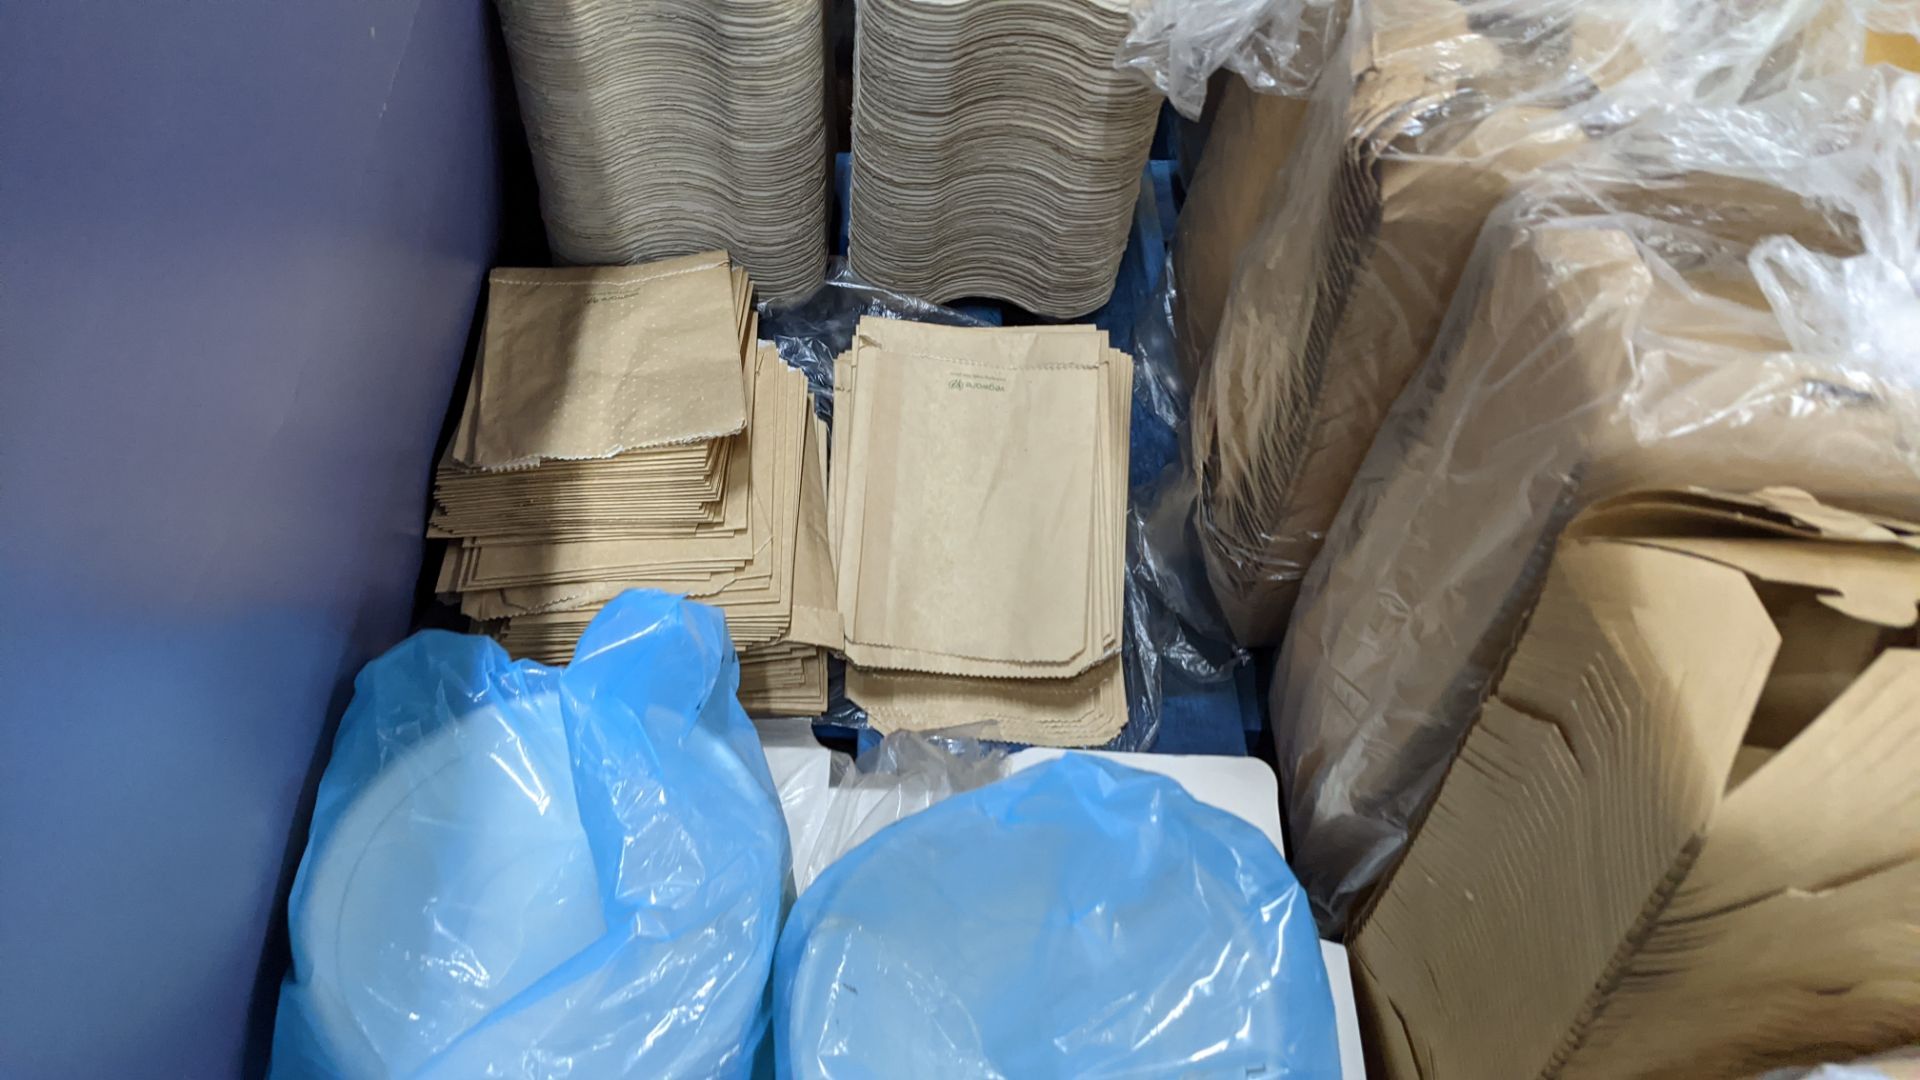 Contents of a pallet of polystyrene, paper & cardboard containers, trays & related items plus 3 larg - Image 6 of 11